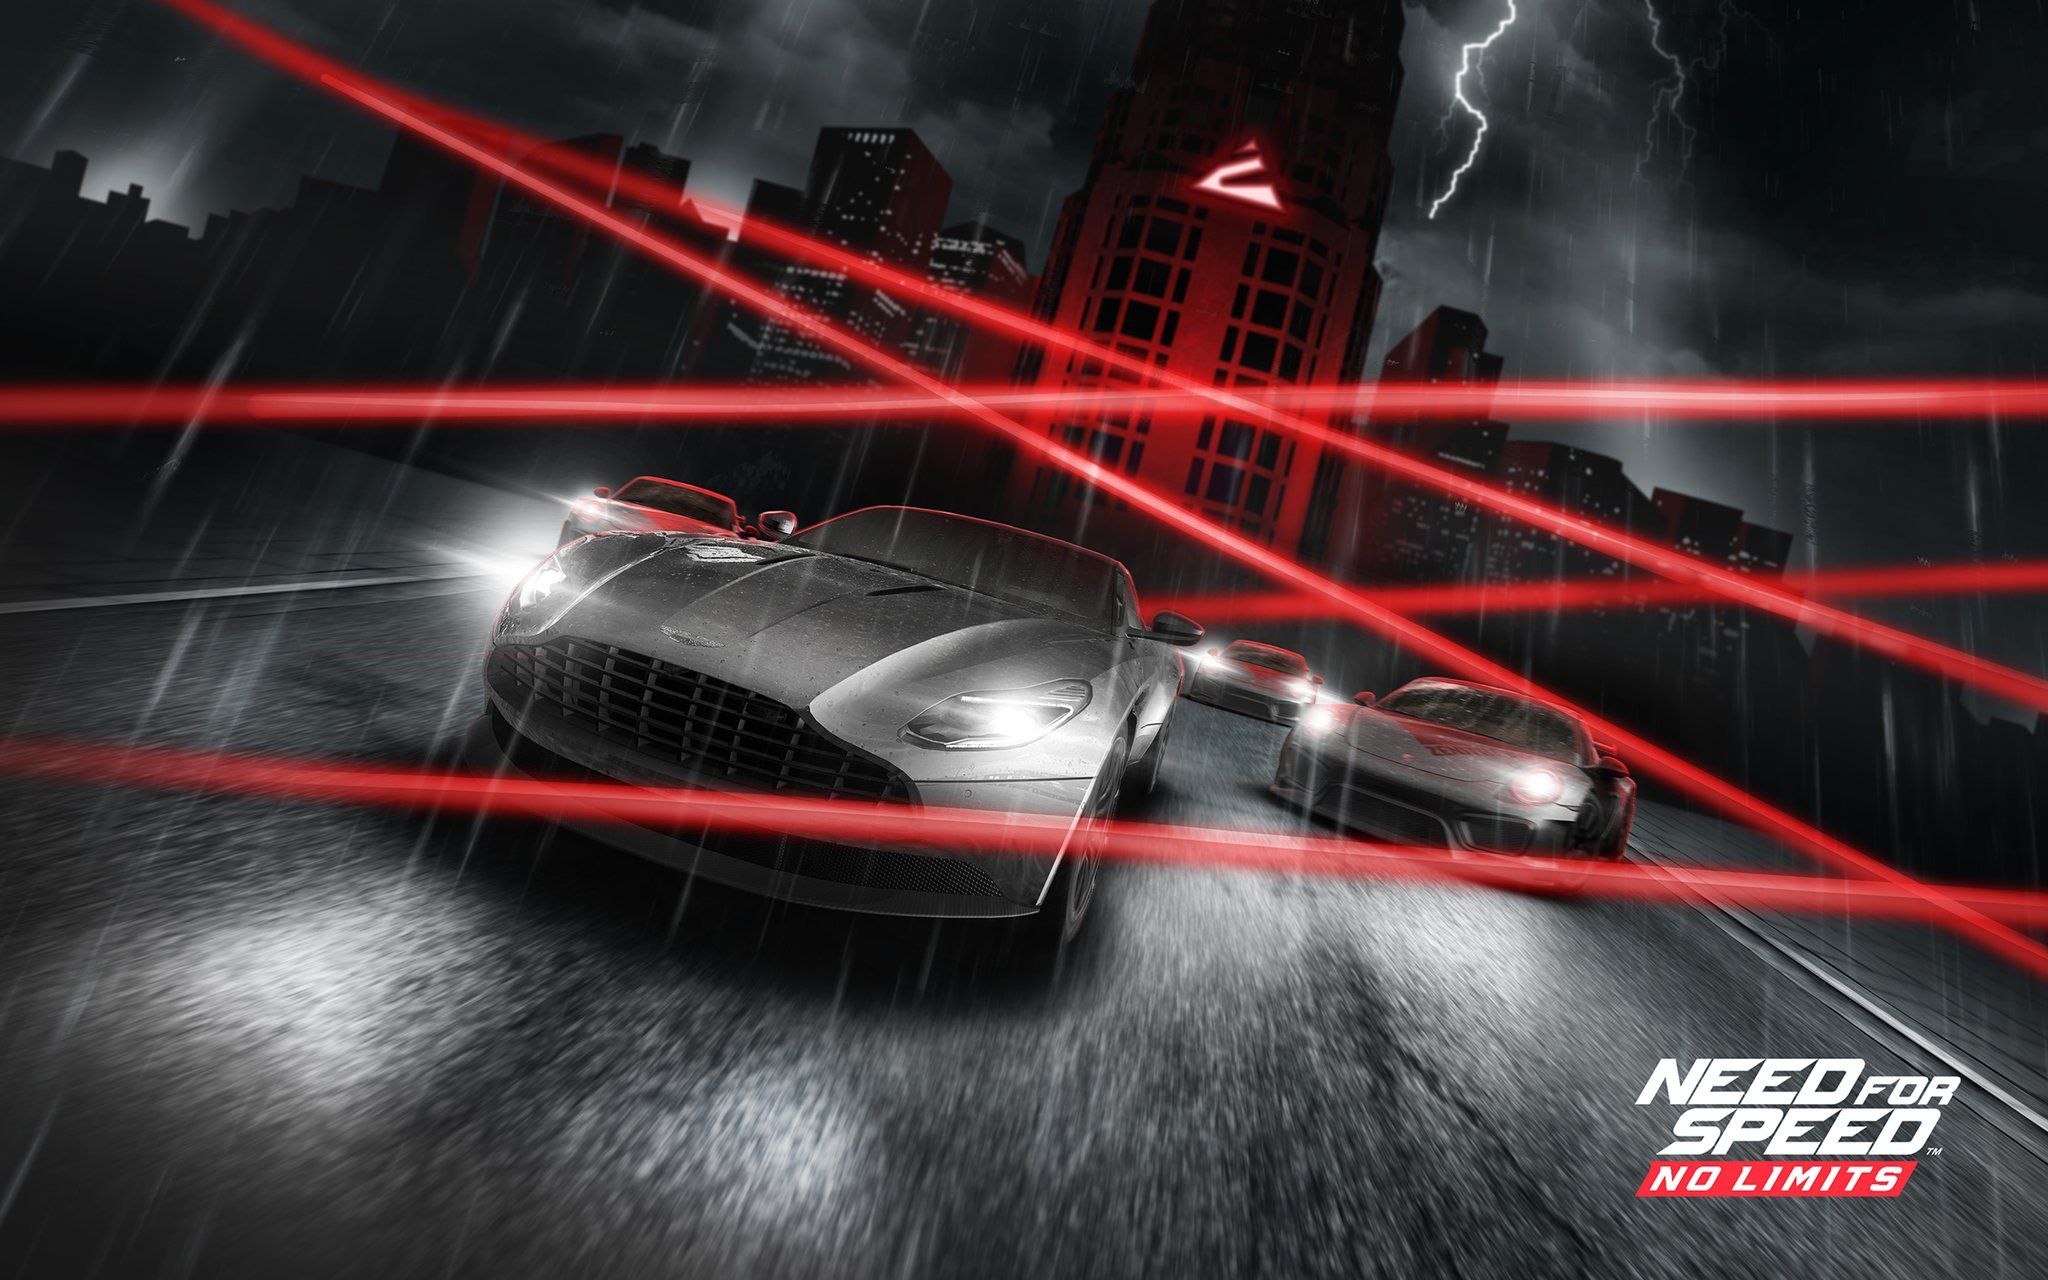 Need for Speed No Limits need this wallpaper. Save the image